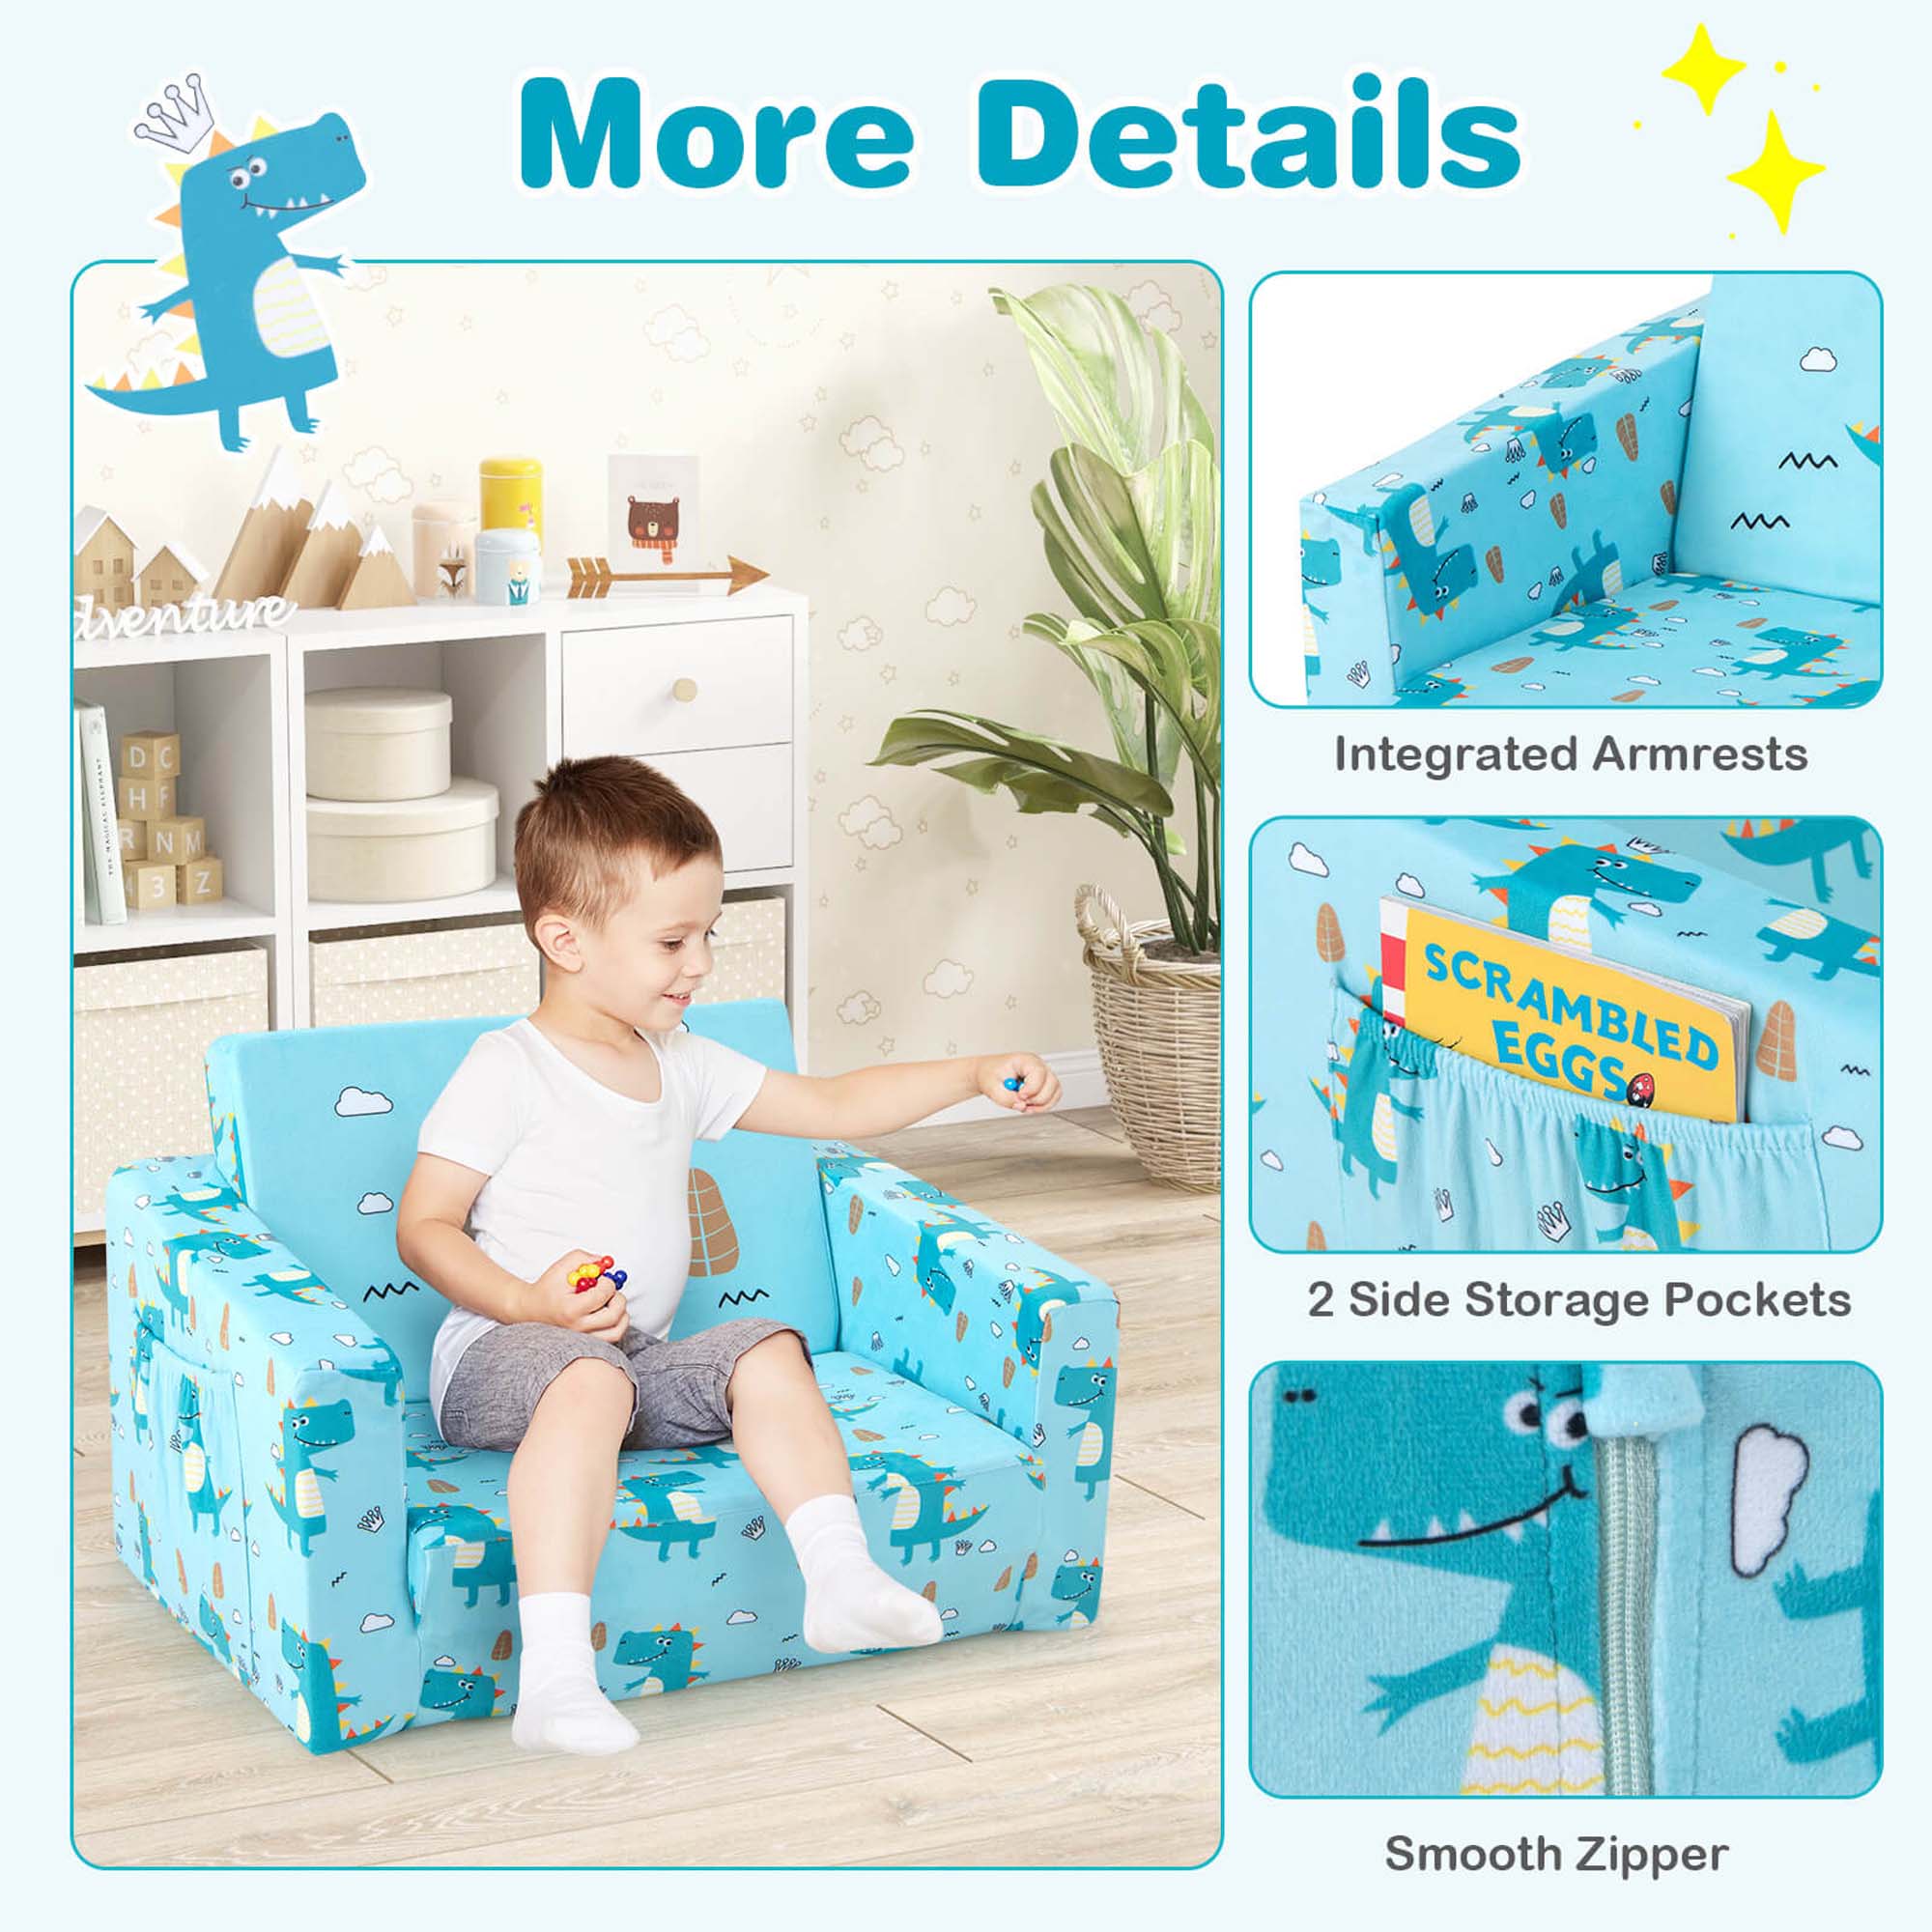 Costway 2-in-1 Convertible Kids Sofa Children Flip-Out Lounger Couch Upholstered Sleeper